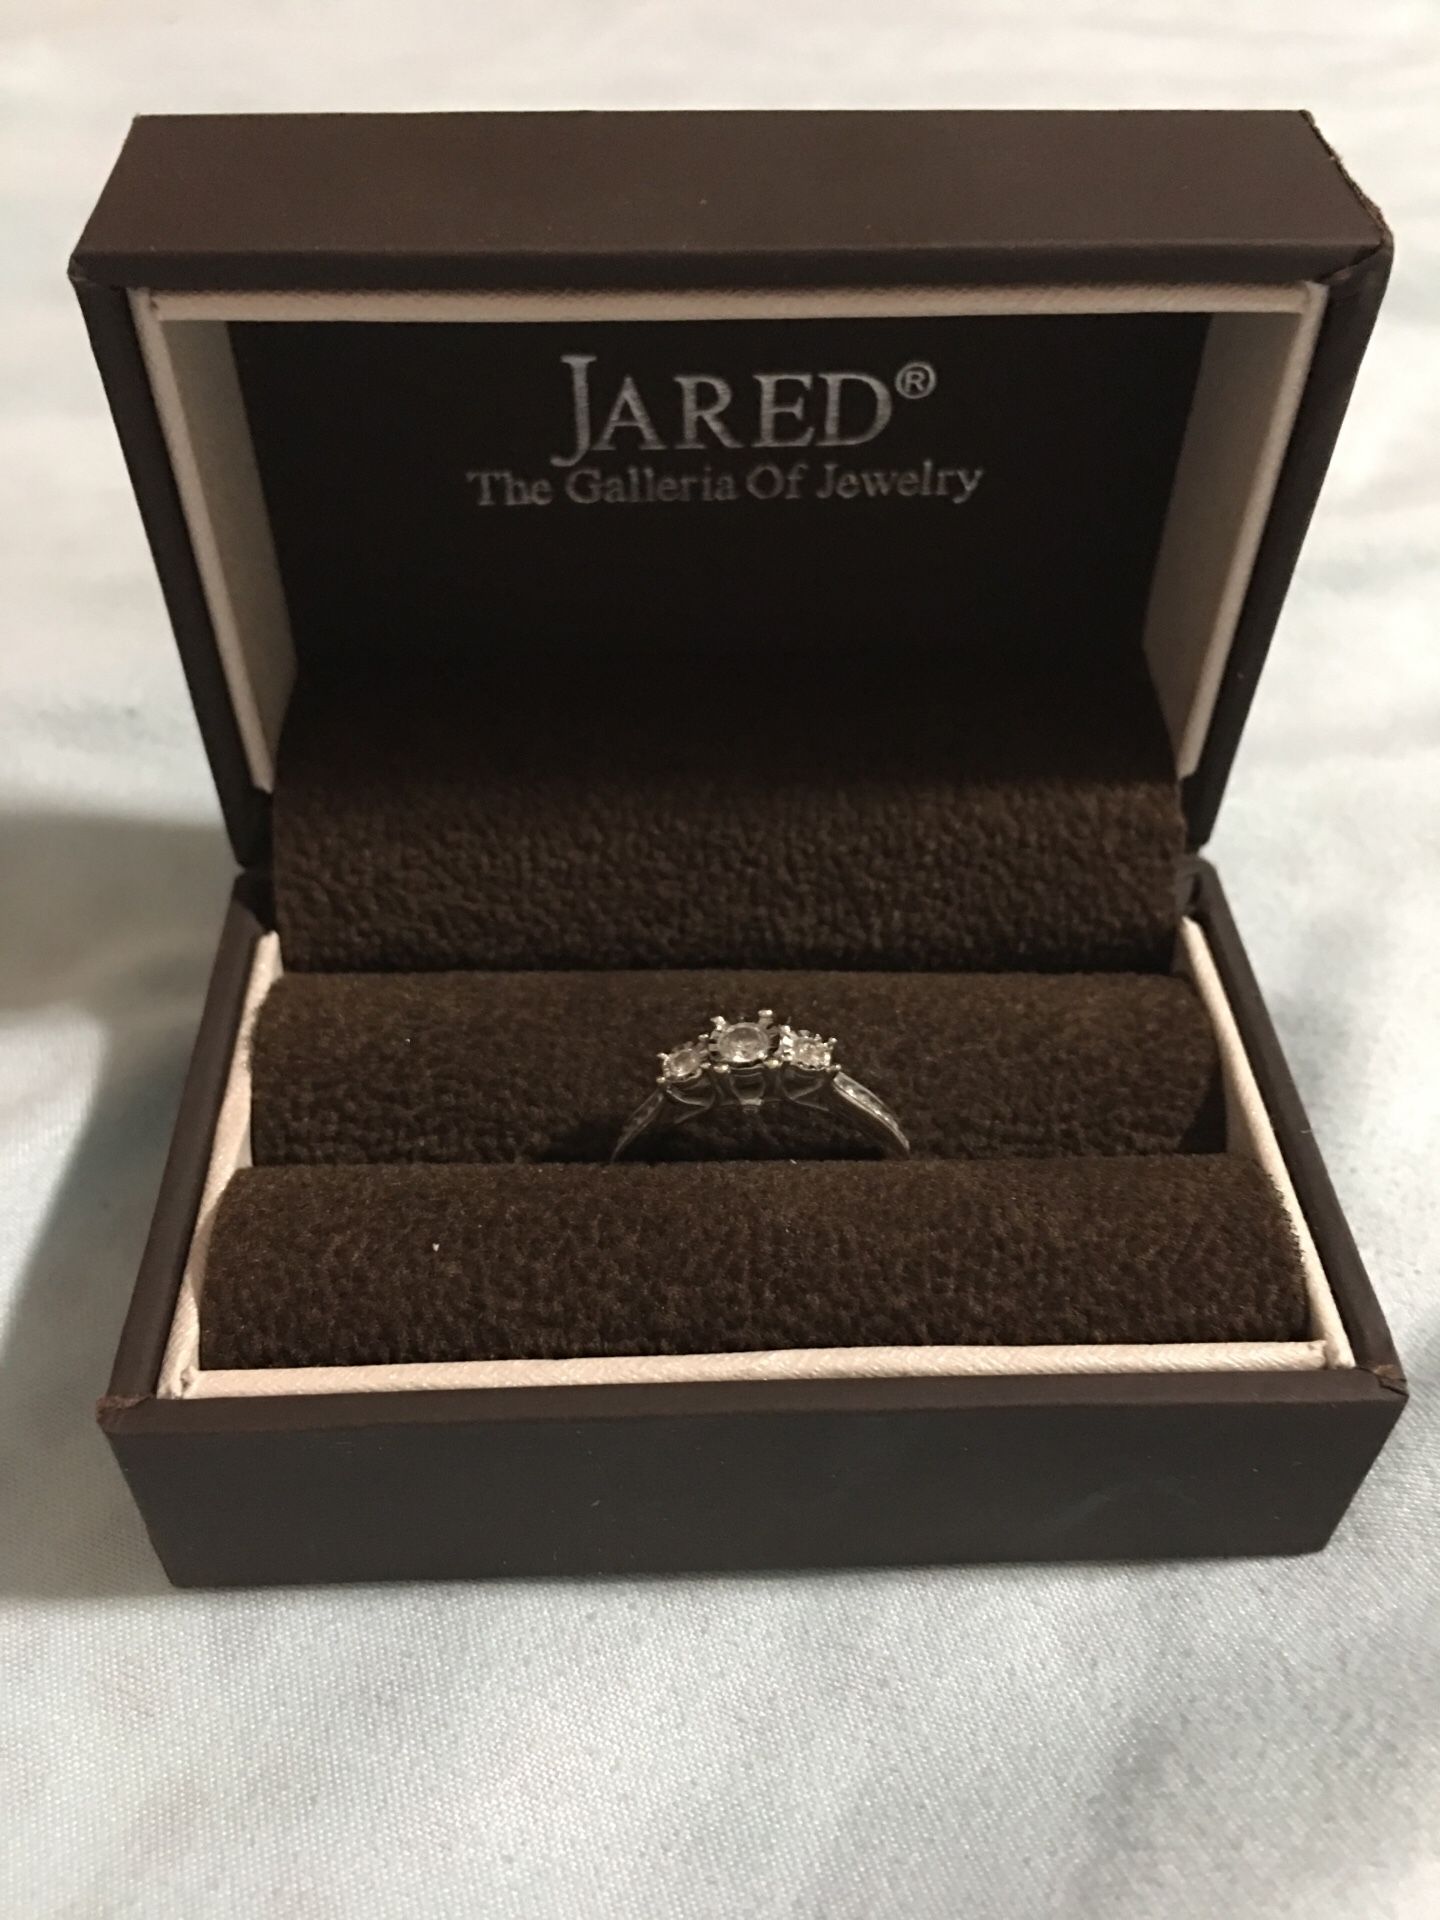 Diamond engagement ring from Jared’s